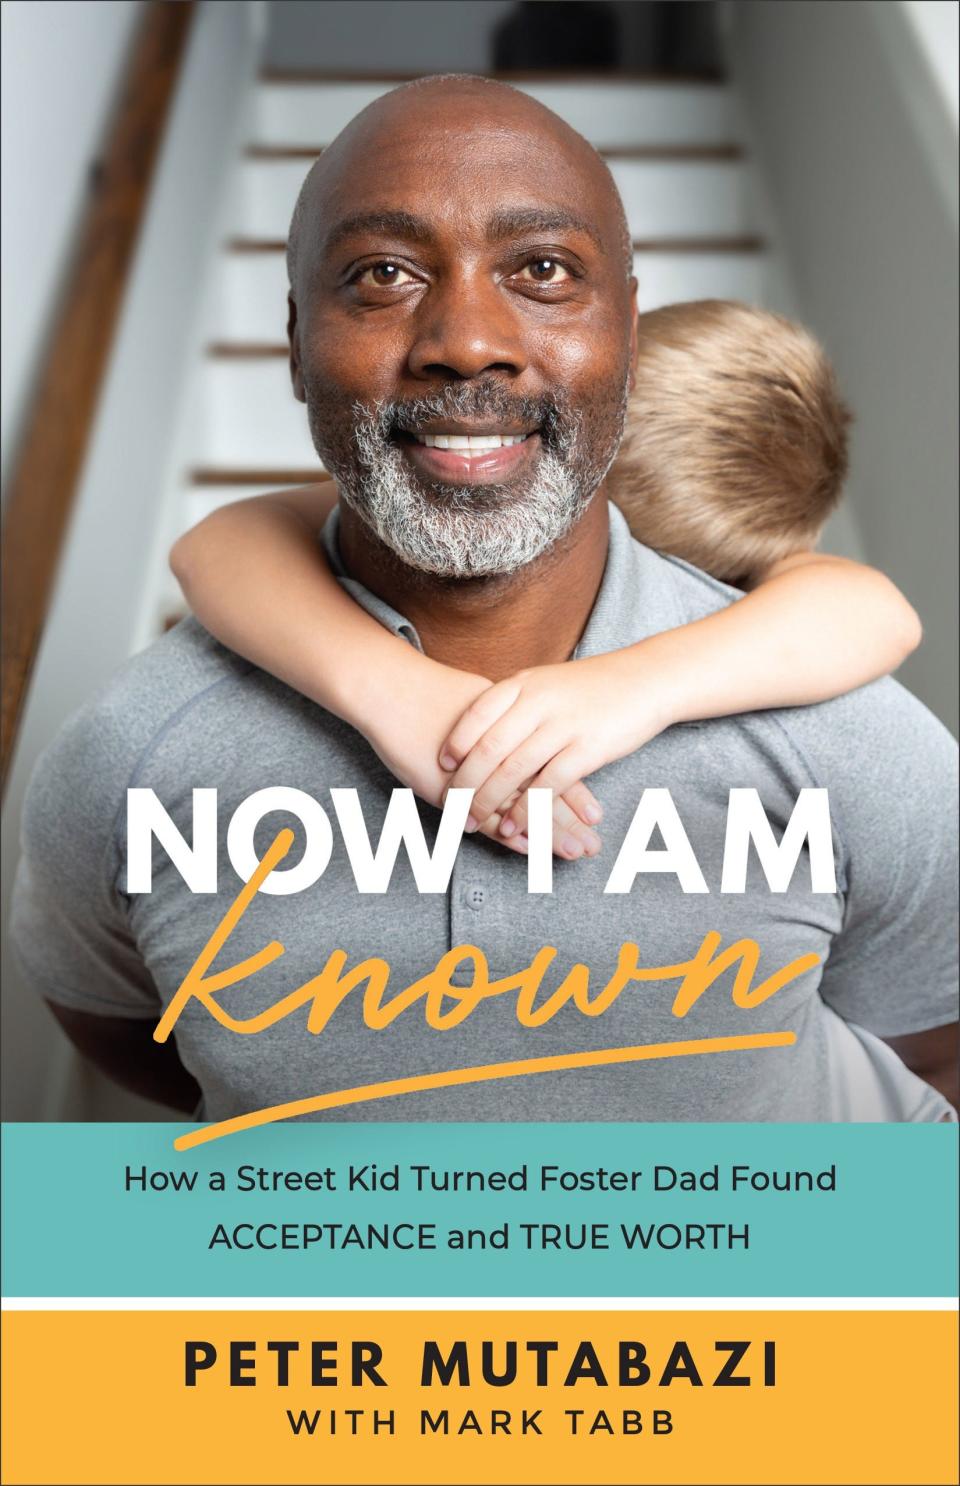 Peter Mutabazi's first book "Now I Am Know": How a street kid turned foster dad found acceptance and true worth.